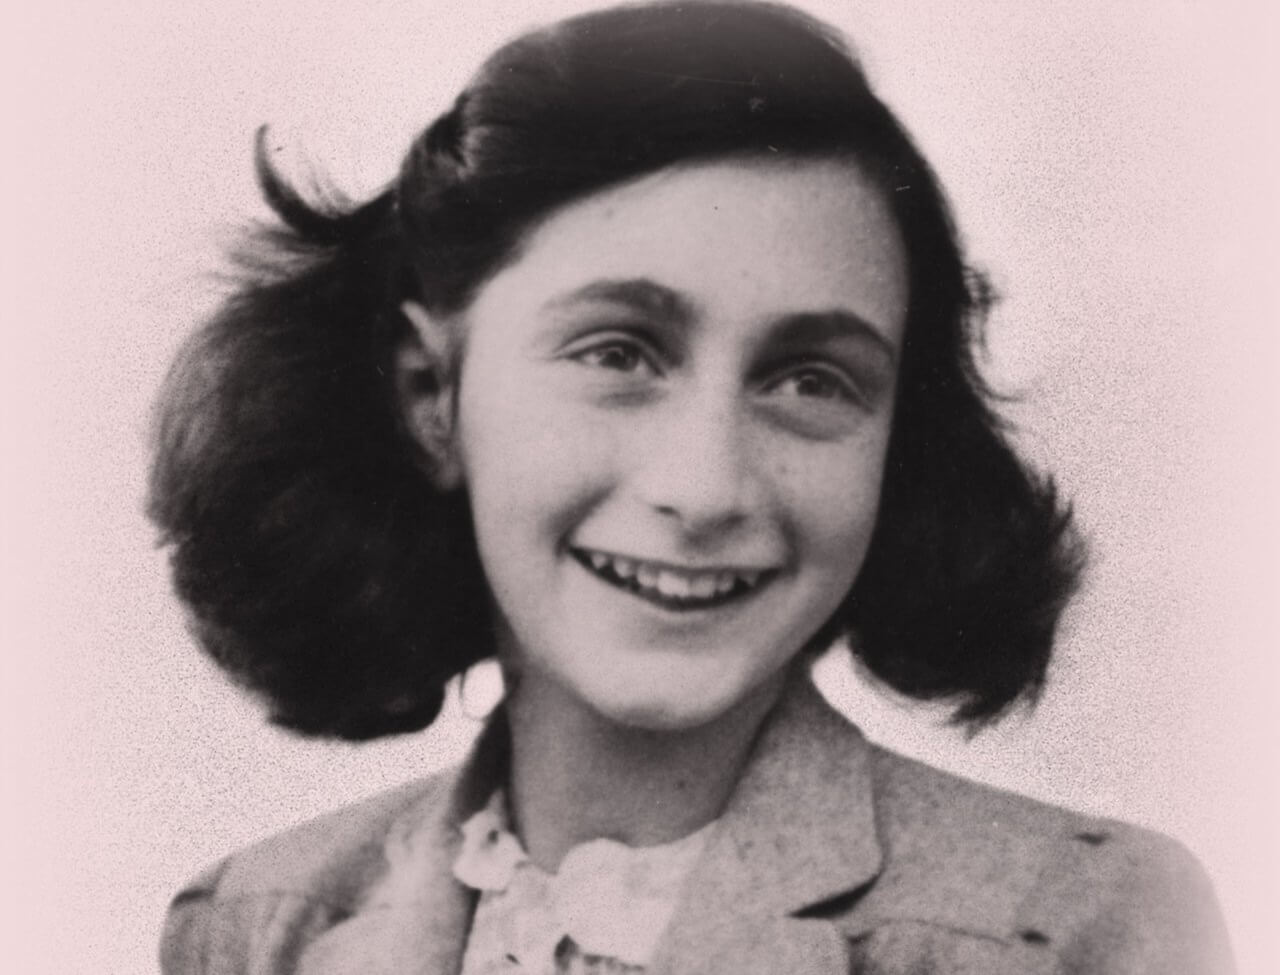 Anne Frank’s diary celebrates 75 years since its first publication